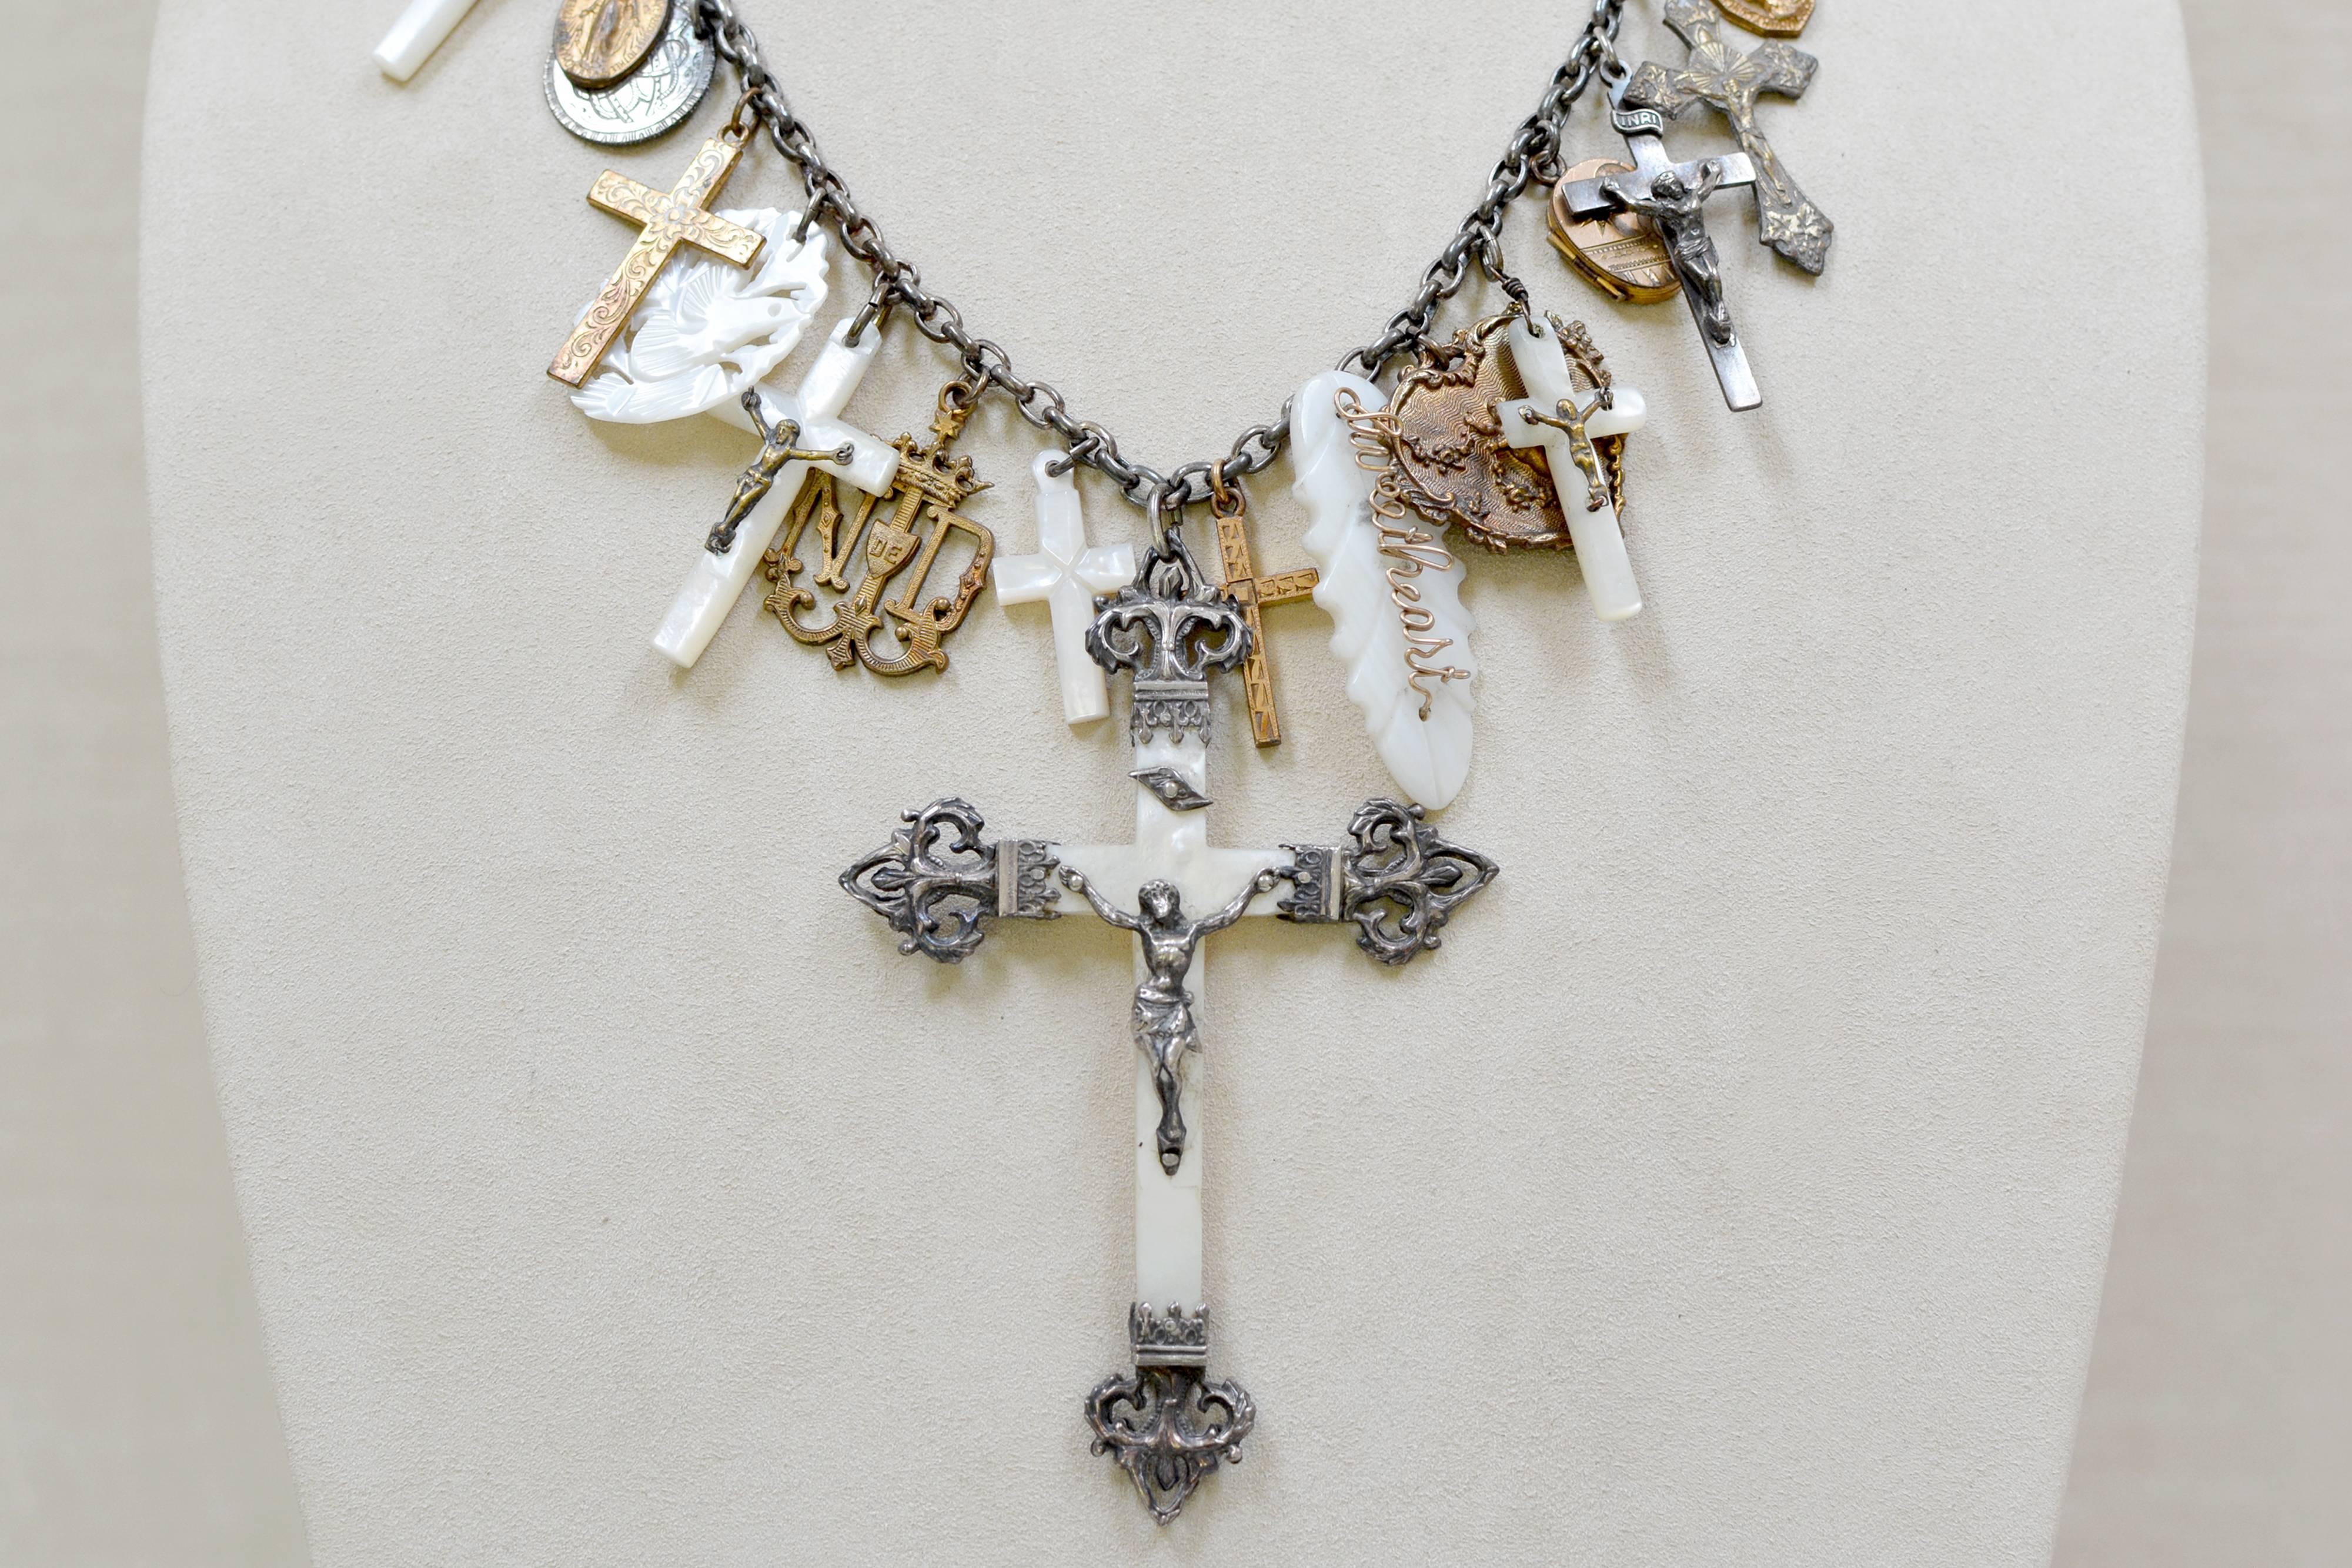 Jill Garber Antique Love Token Talisman Necklace Mother-of-Pearl Cross Necklace In Excellent Condition For Sale In Saginaw, MI